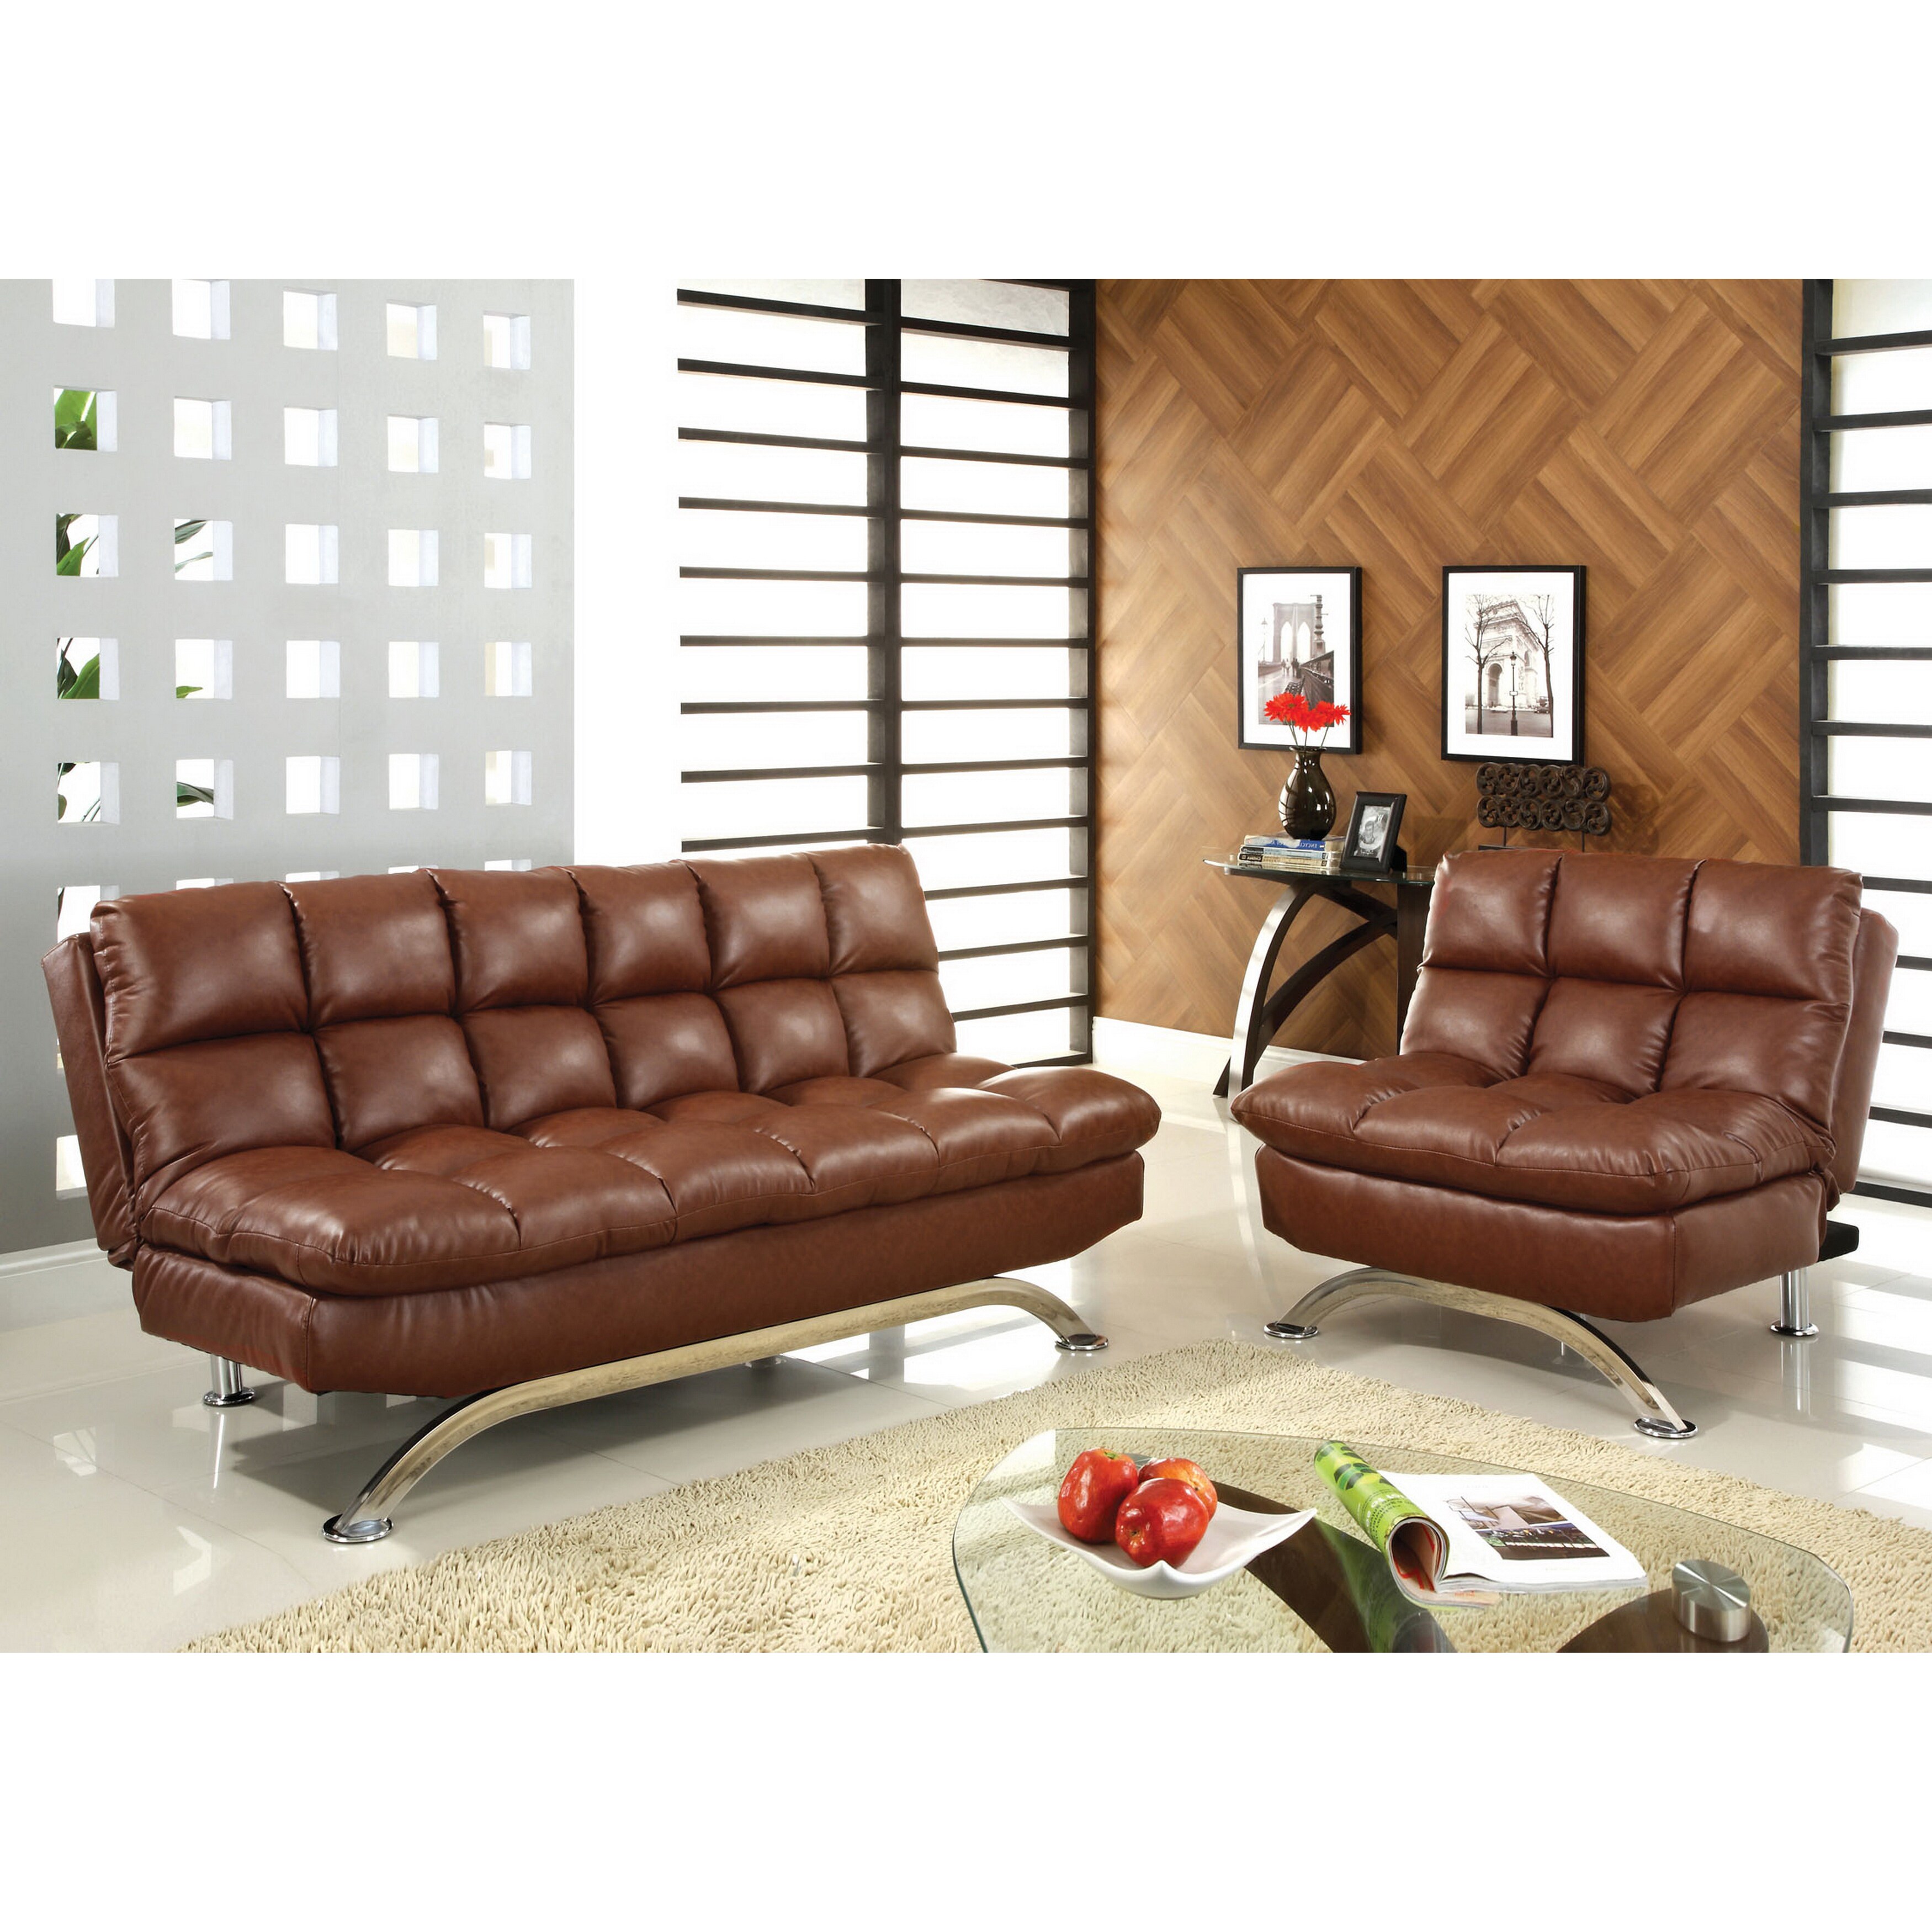 Furniture Of America Deep Cushion 2 piece Sofa/ Sofabed And Chair (Dark brownGlued and double doweled for exceptional stabilityComfortable sofa bed with a higher and deeper cushion than most sofa bedsSofa style seat transforms into a full size bed in seco